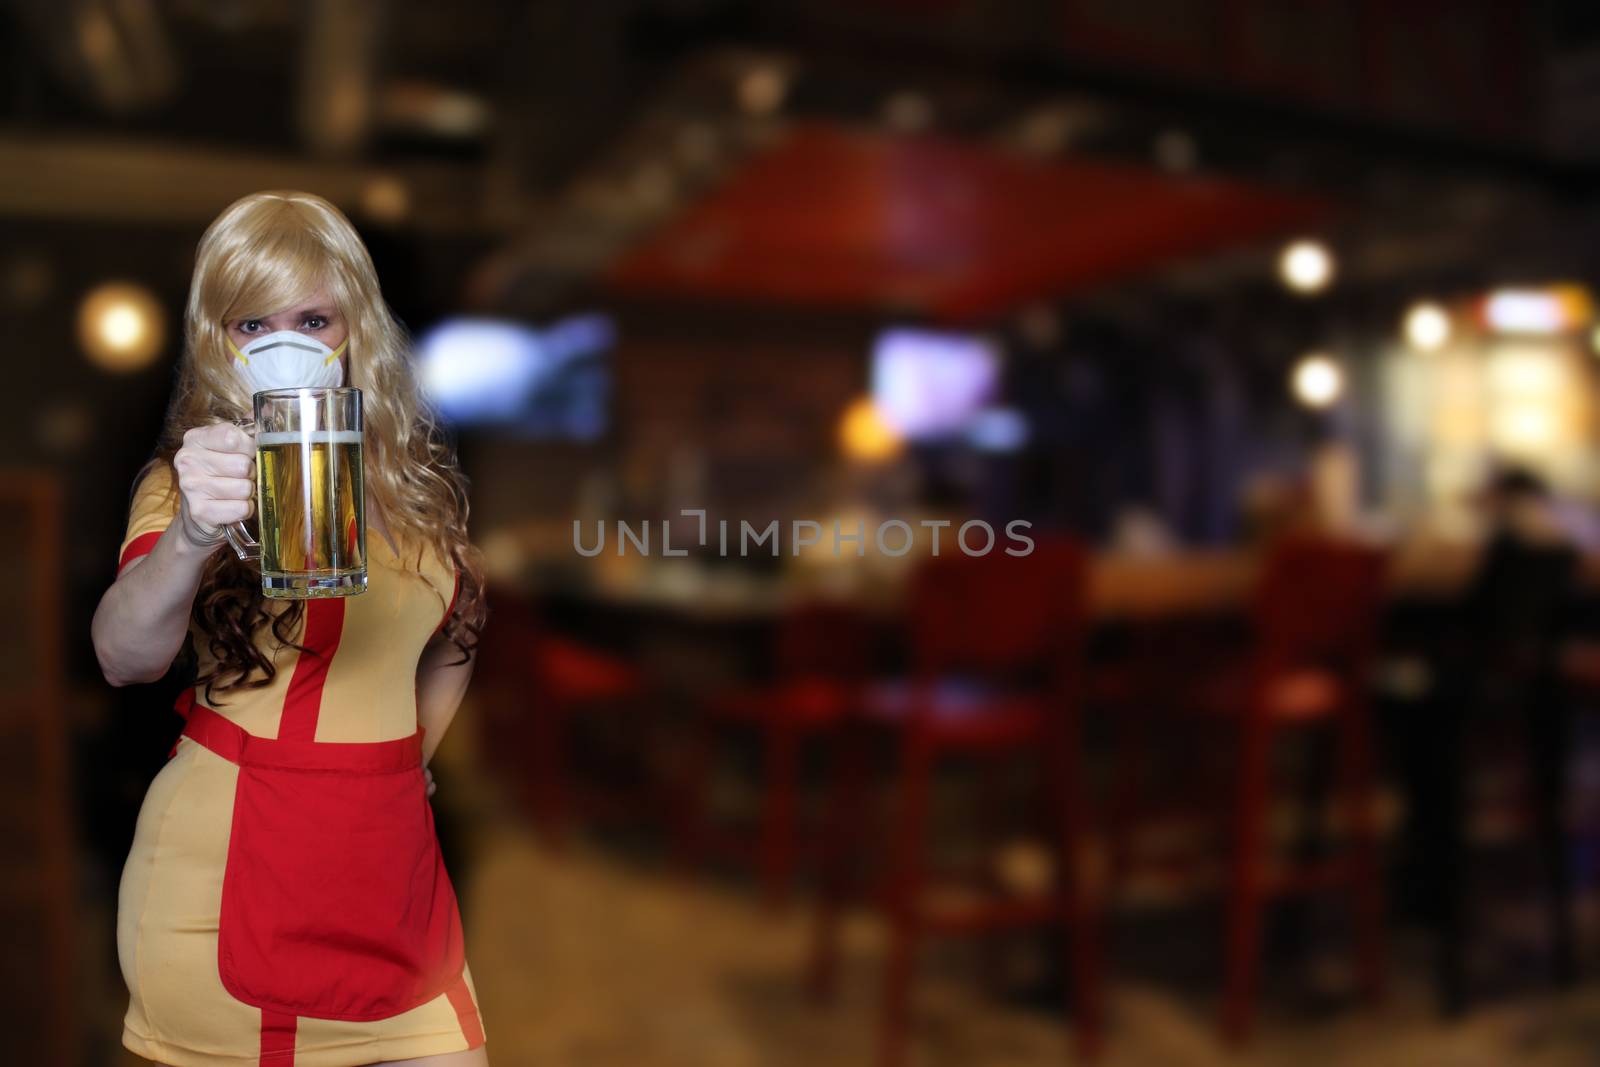 Waitress Wearing N95 Mask With Blurred Restaurant Background